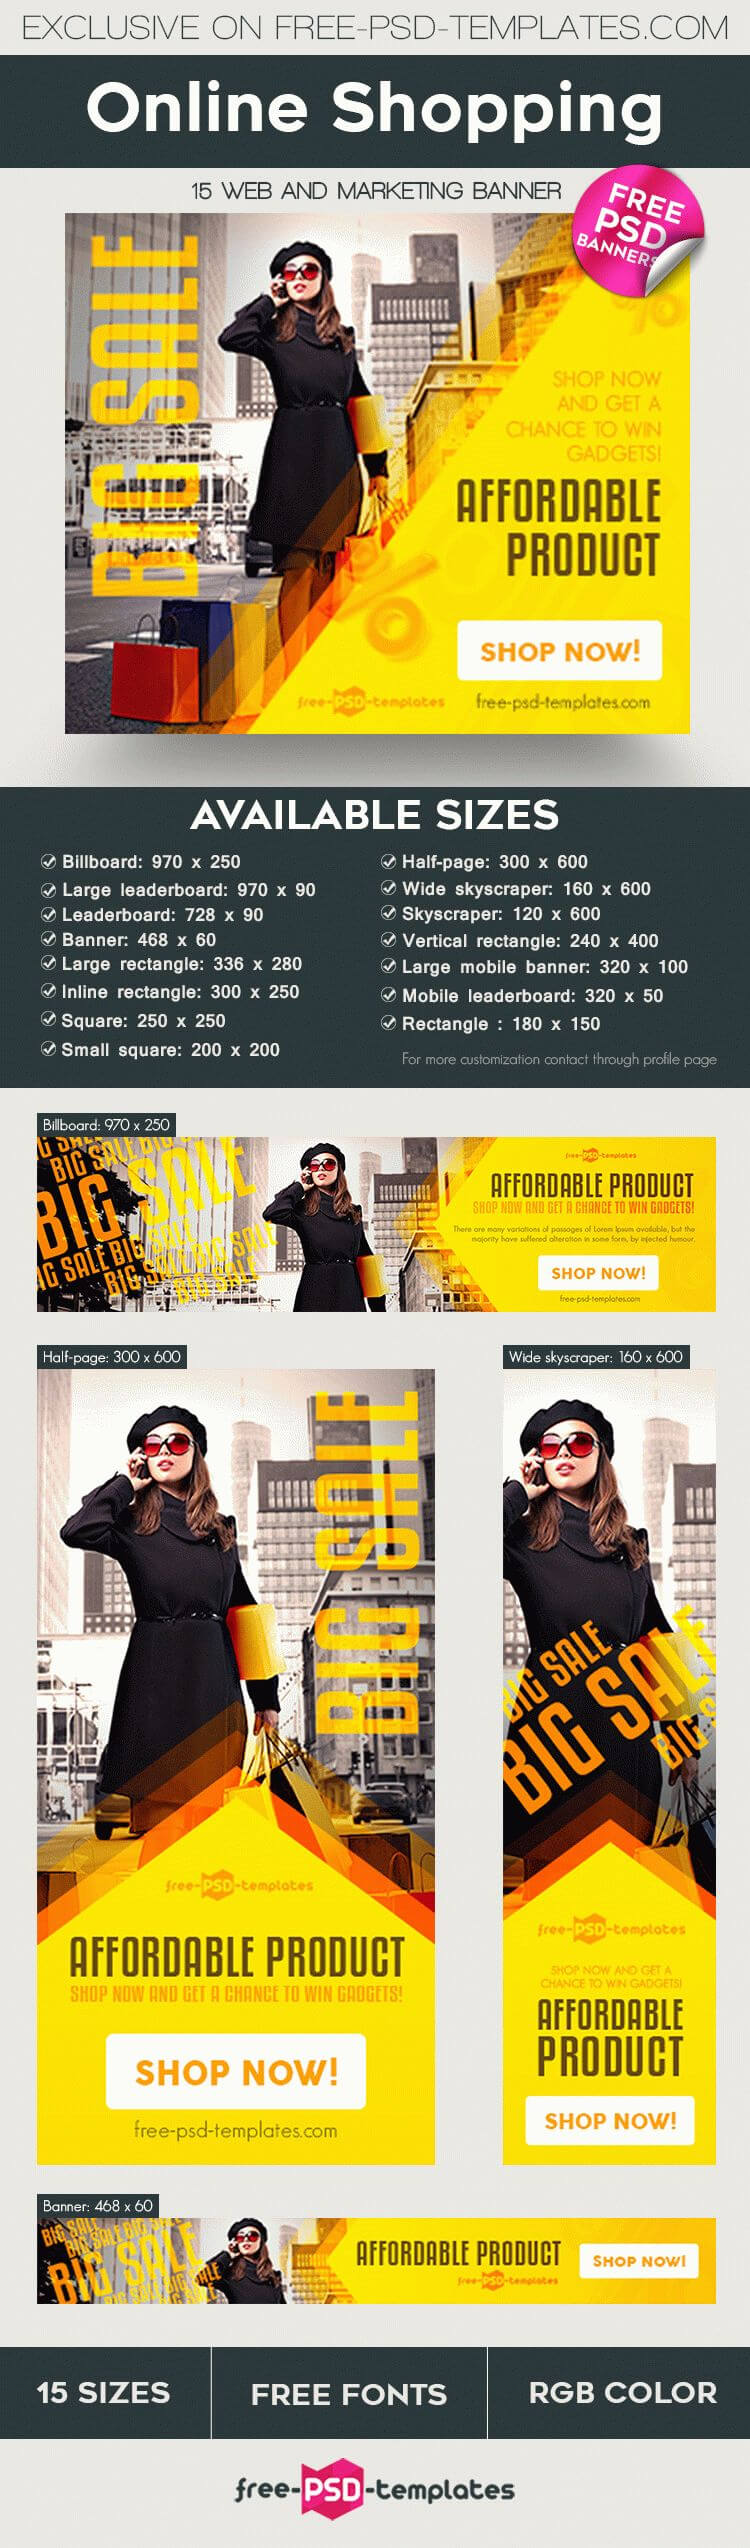 15 Free Online Shopping Banner In Psd | Free Psd Templates For Free Online Banner Templates